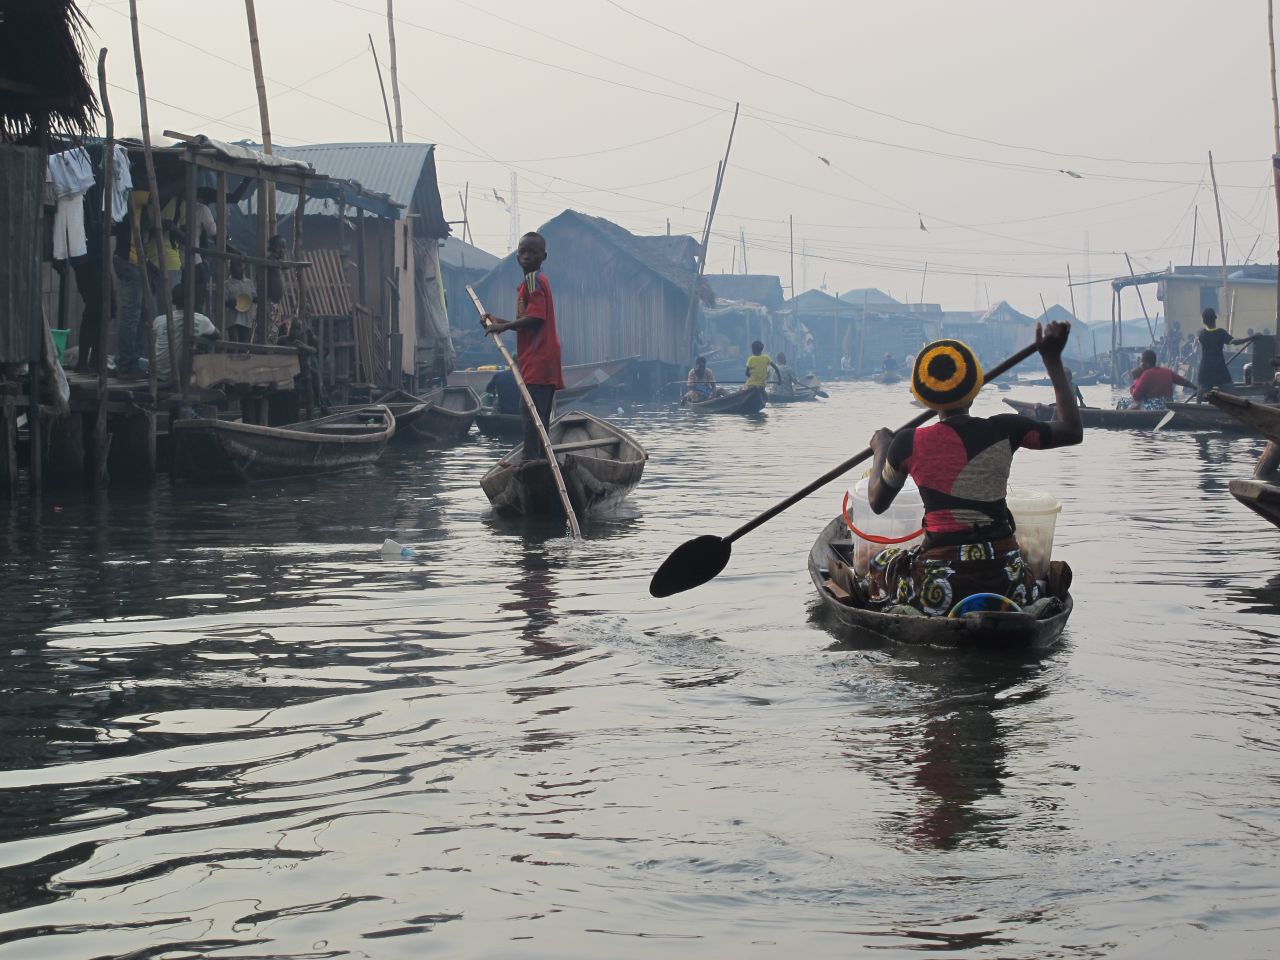 Nicknamed by some as the "Venice of Africa," the floating village of Makoko in Lagos, Nigeria, is inhabited by people who not only live on water, but also also depend on it for their livelihood. 